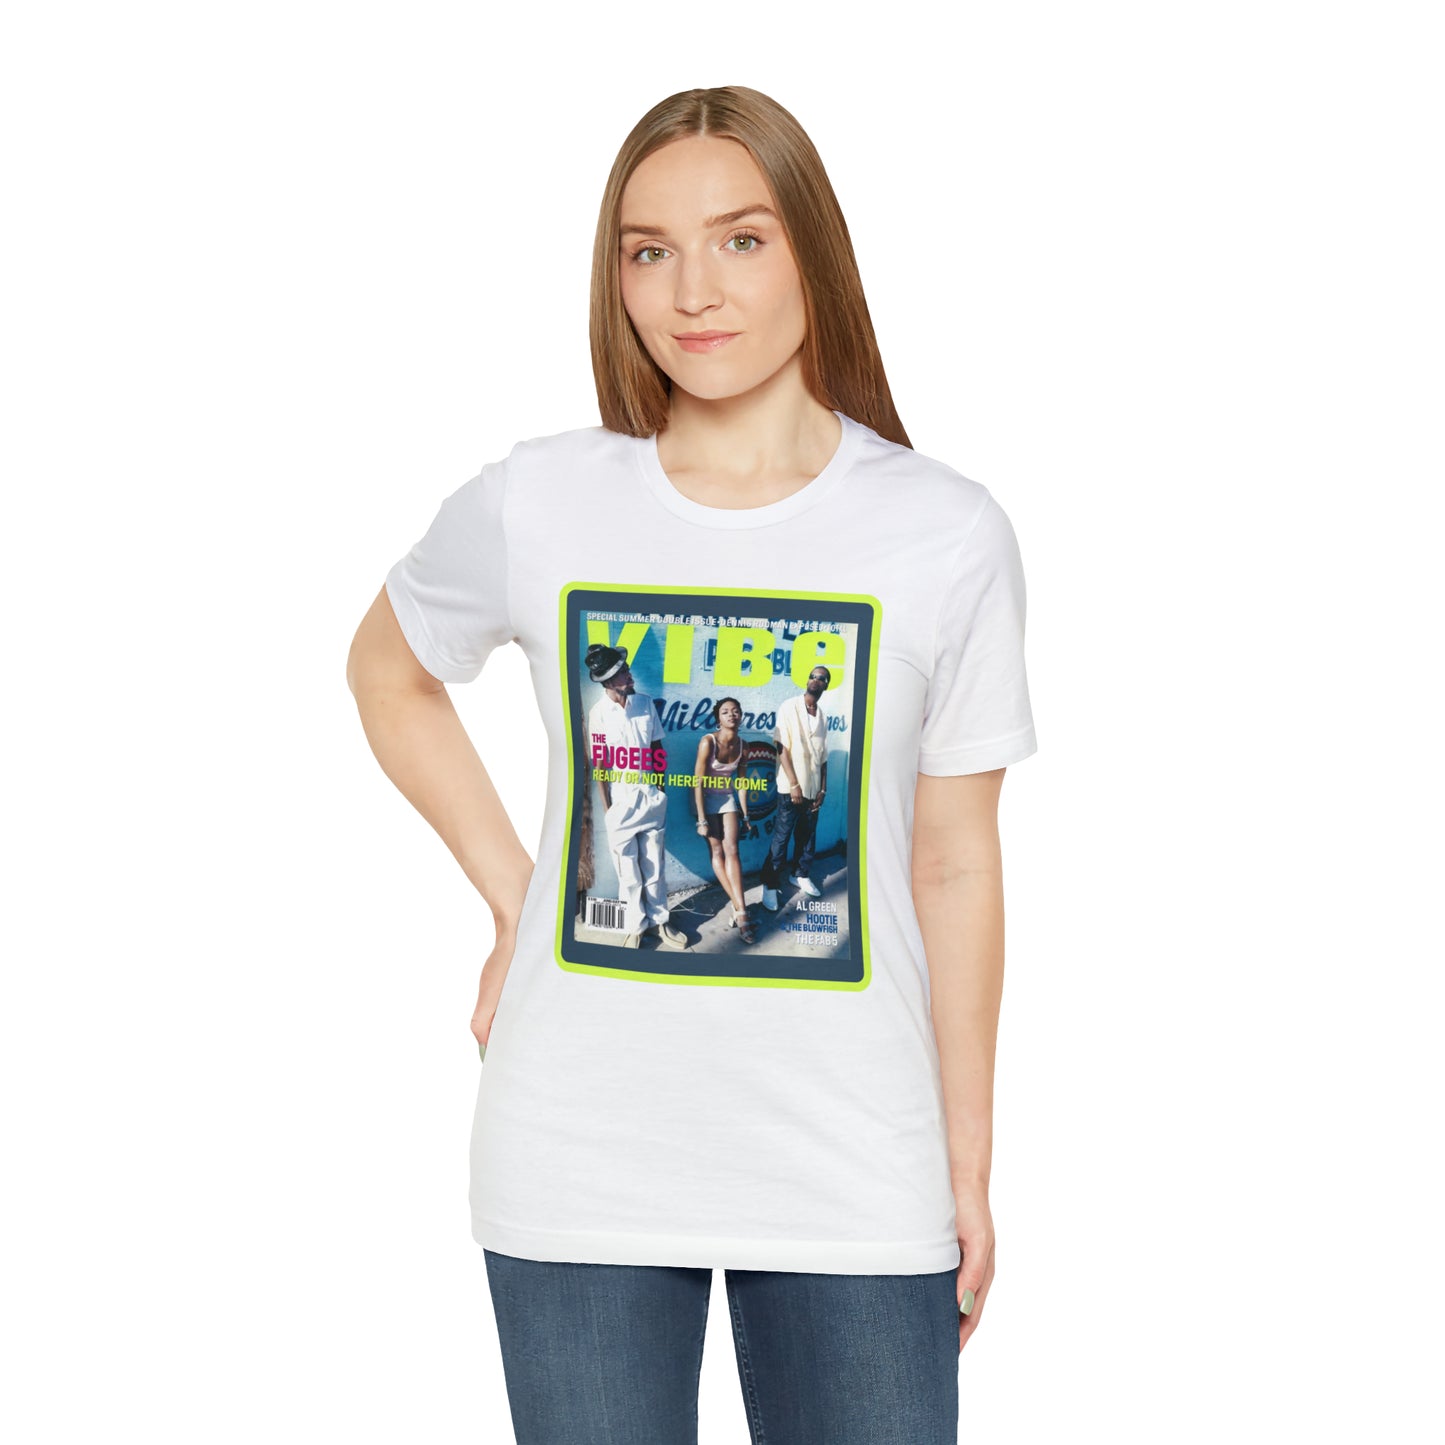 90s Throwback The Fugees Wyclef Jean, Pras Michel, and Lauryn Hill Vibe Magazine Unisex Jersey Short Sleeve Tee